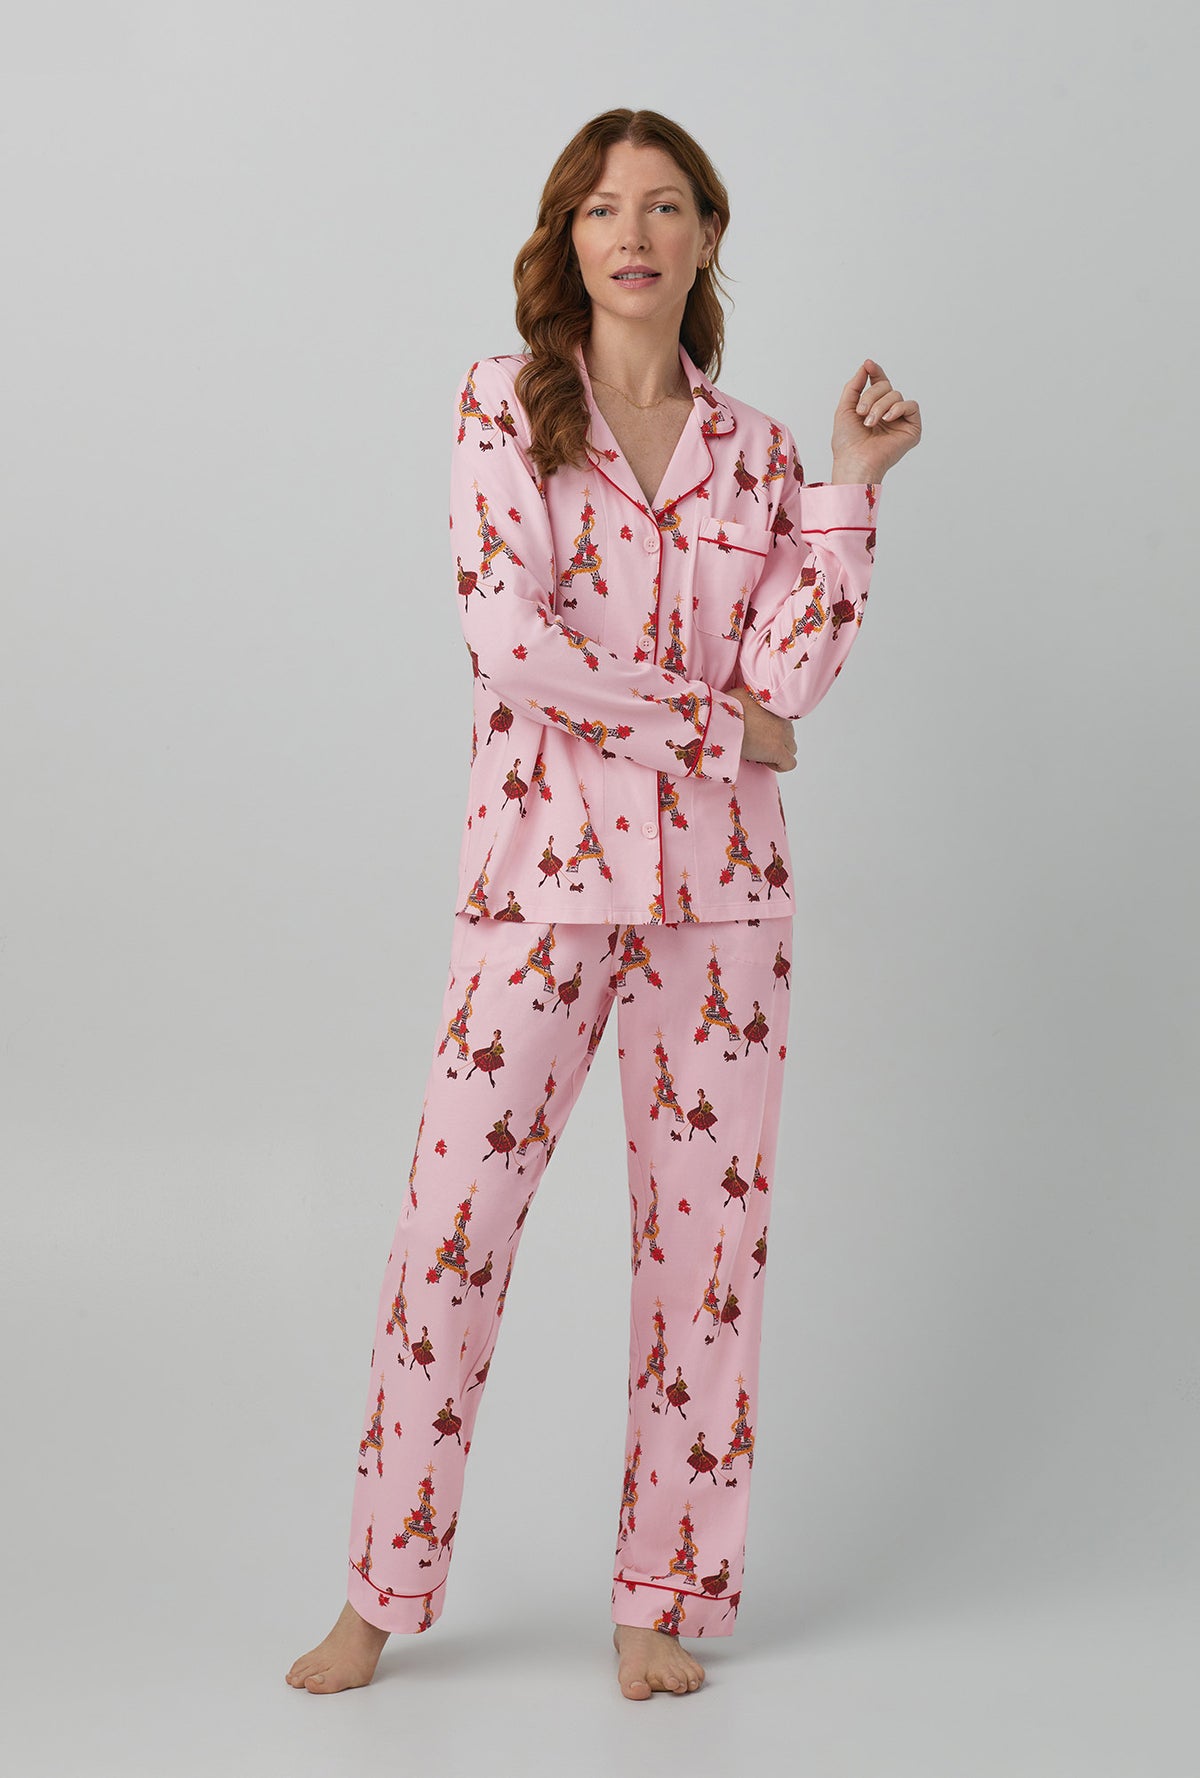 22 Momme Full Length Silk Pajamas Set Rosy Pink 1X